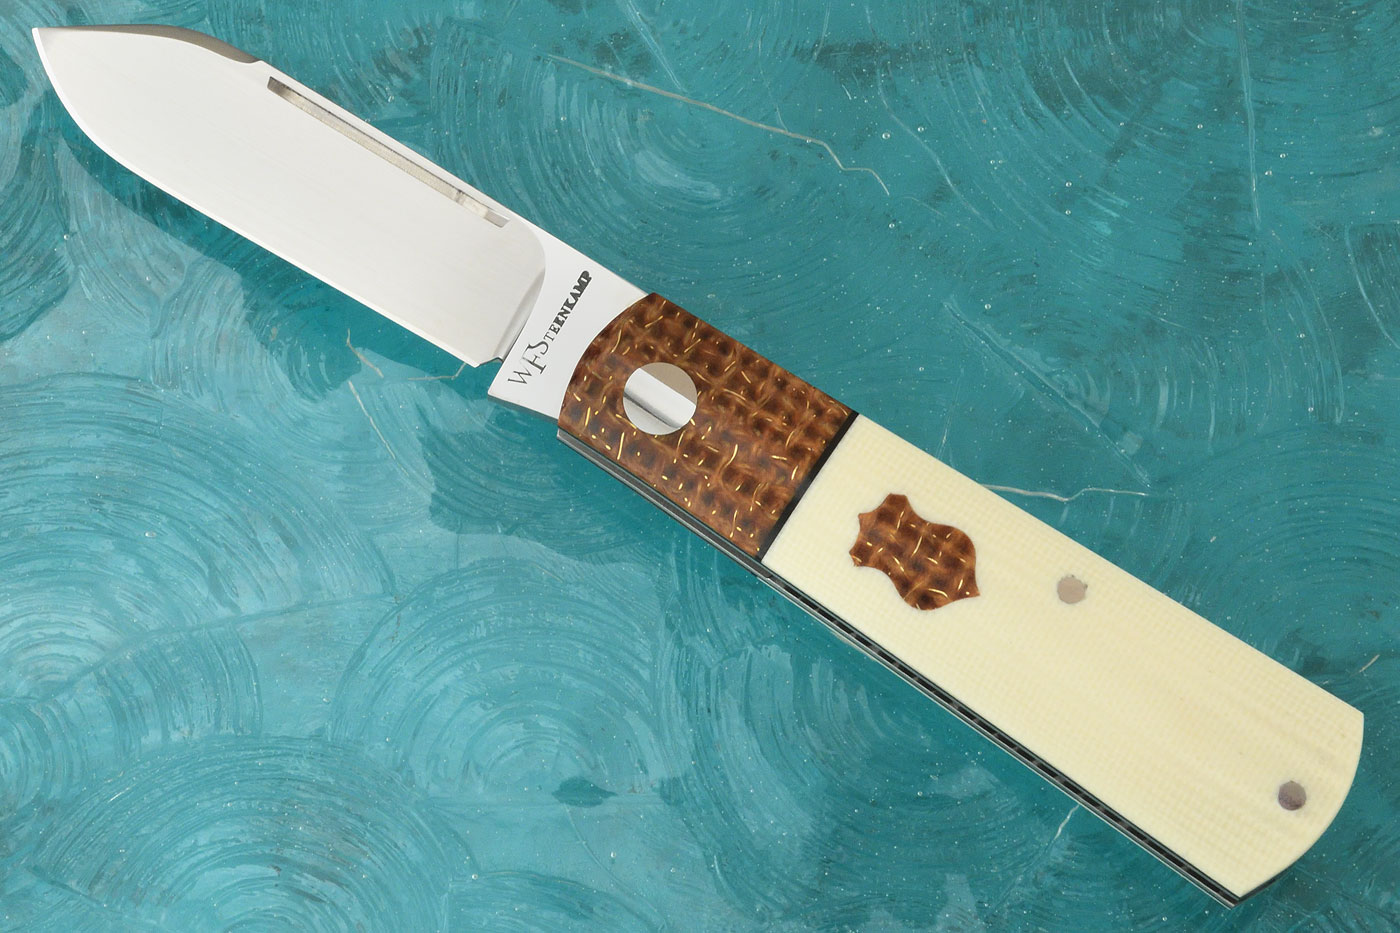 Barlow Slipjoint with Ivory G10 and Thunderstorm Kevlar